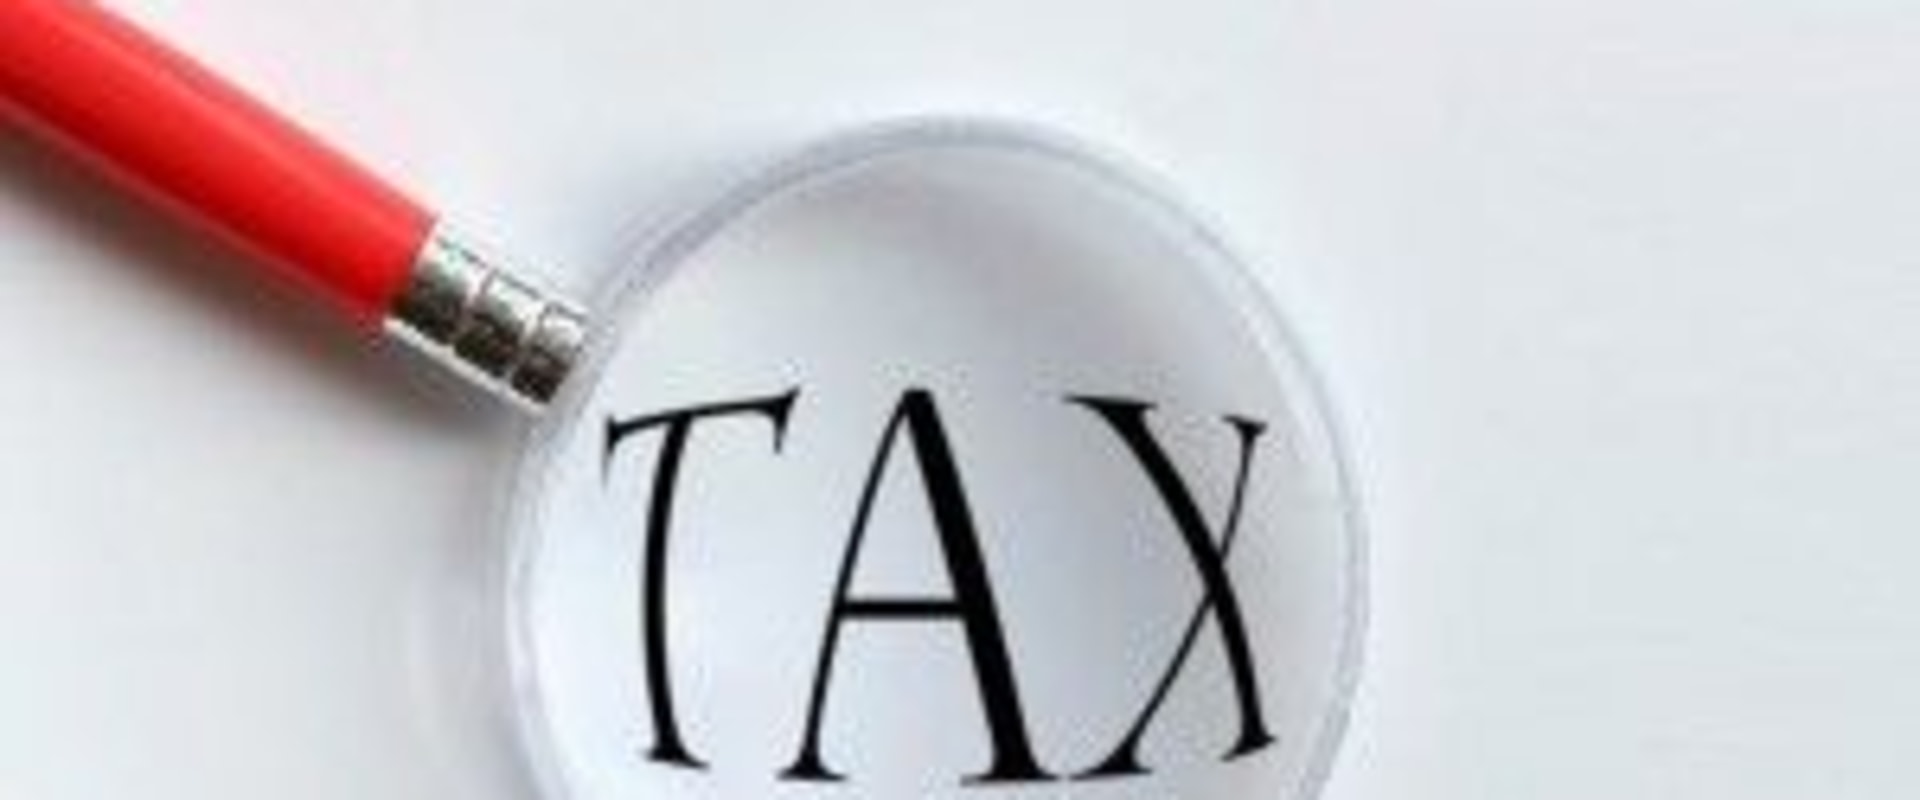 How does the irs code define a qualified charitable contribution deduction?